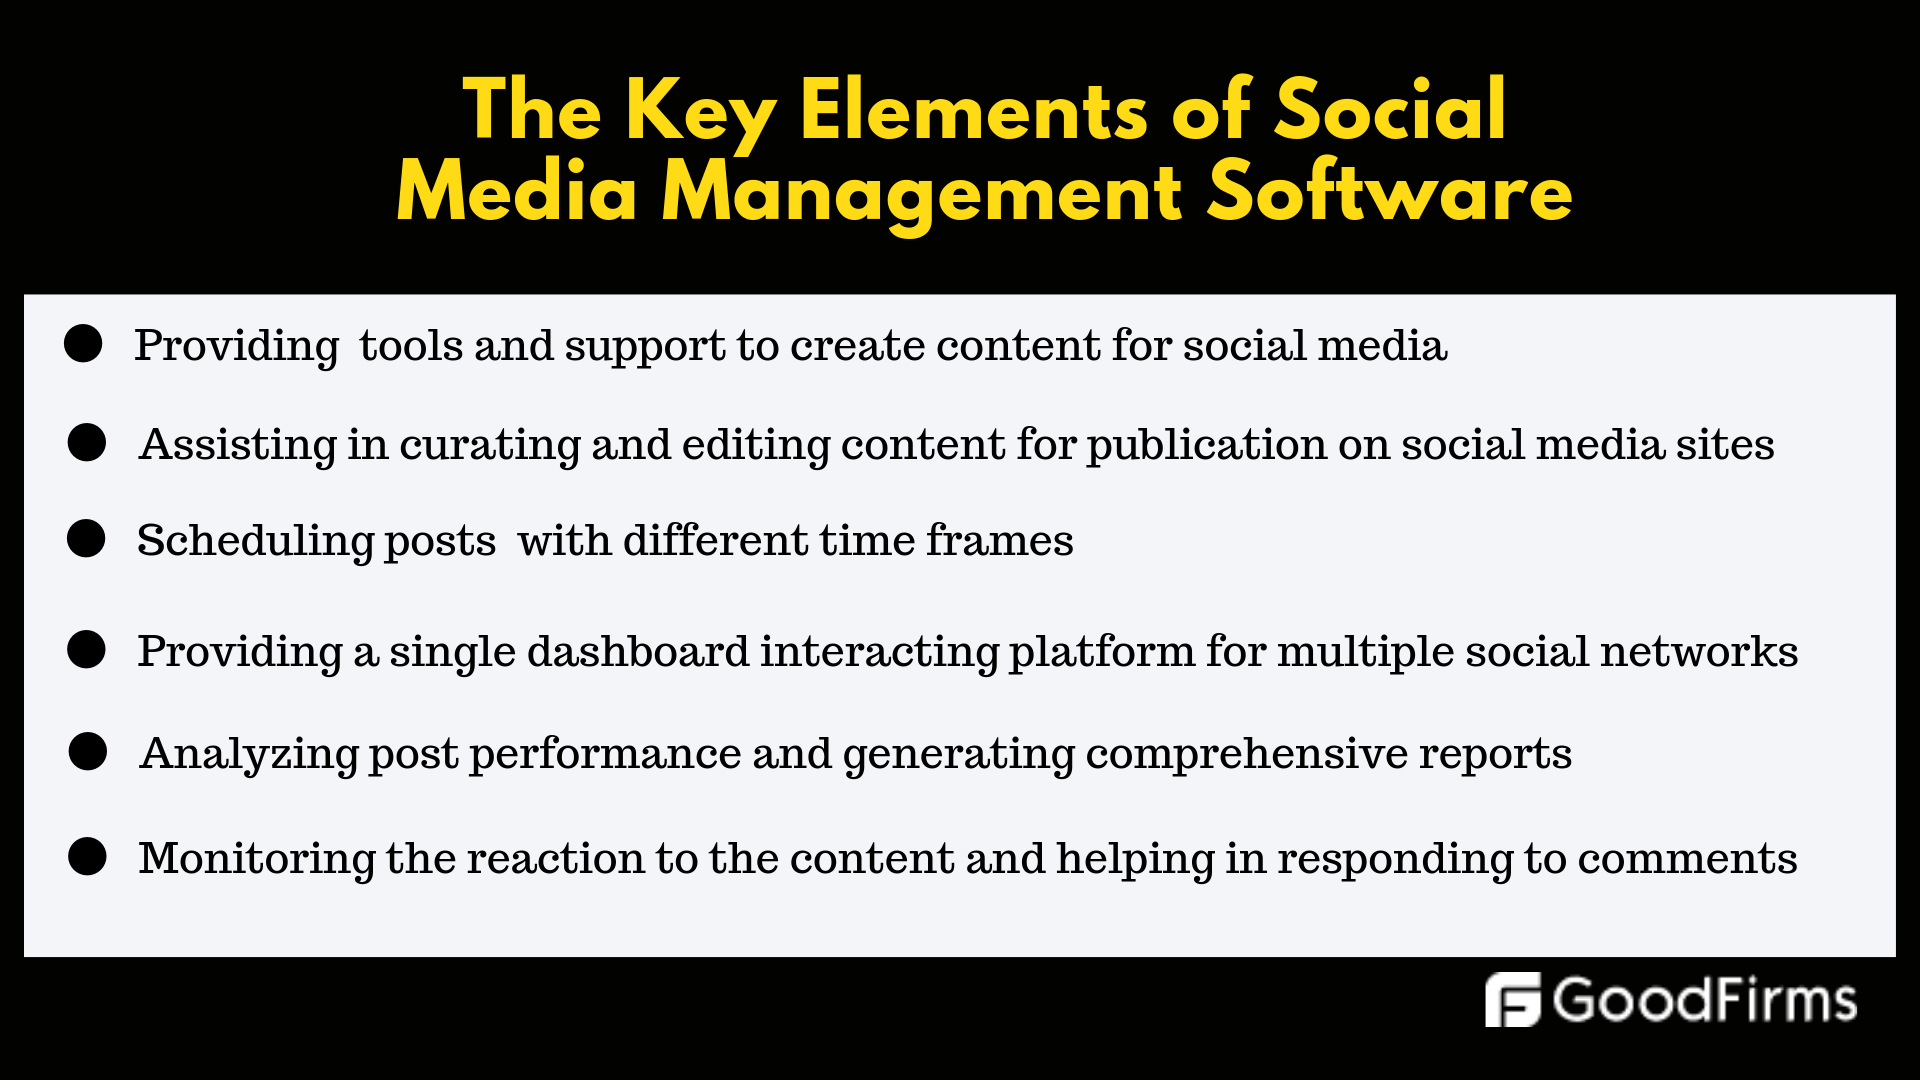 Features of a social media management software